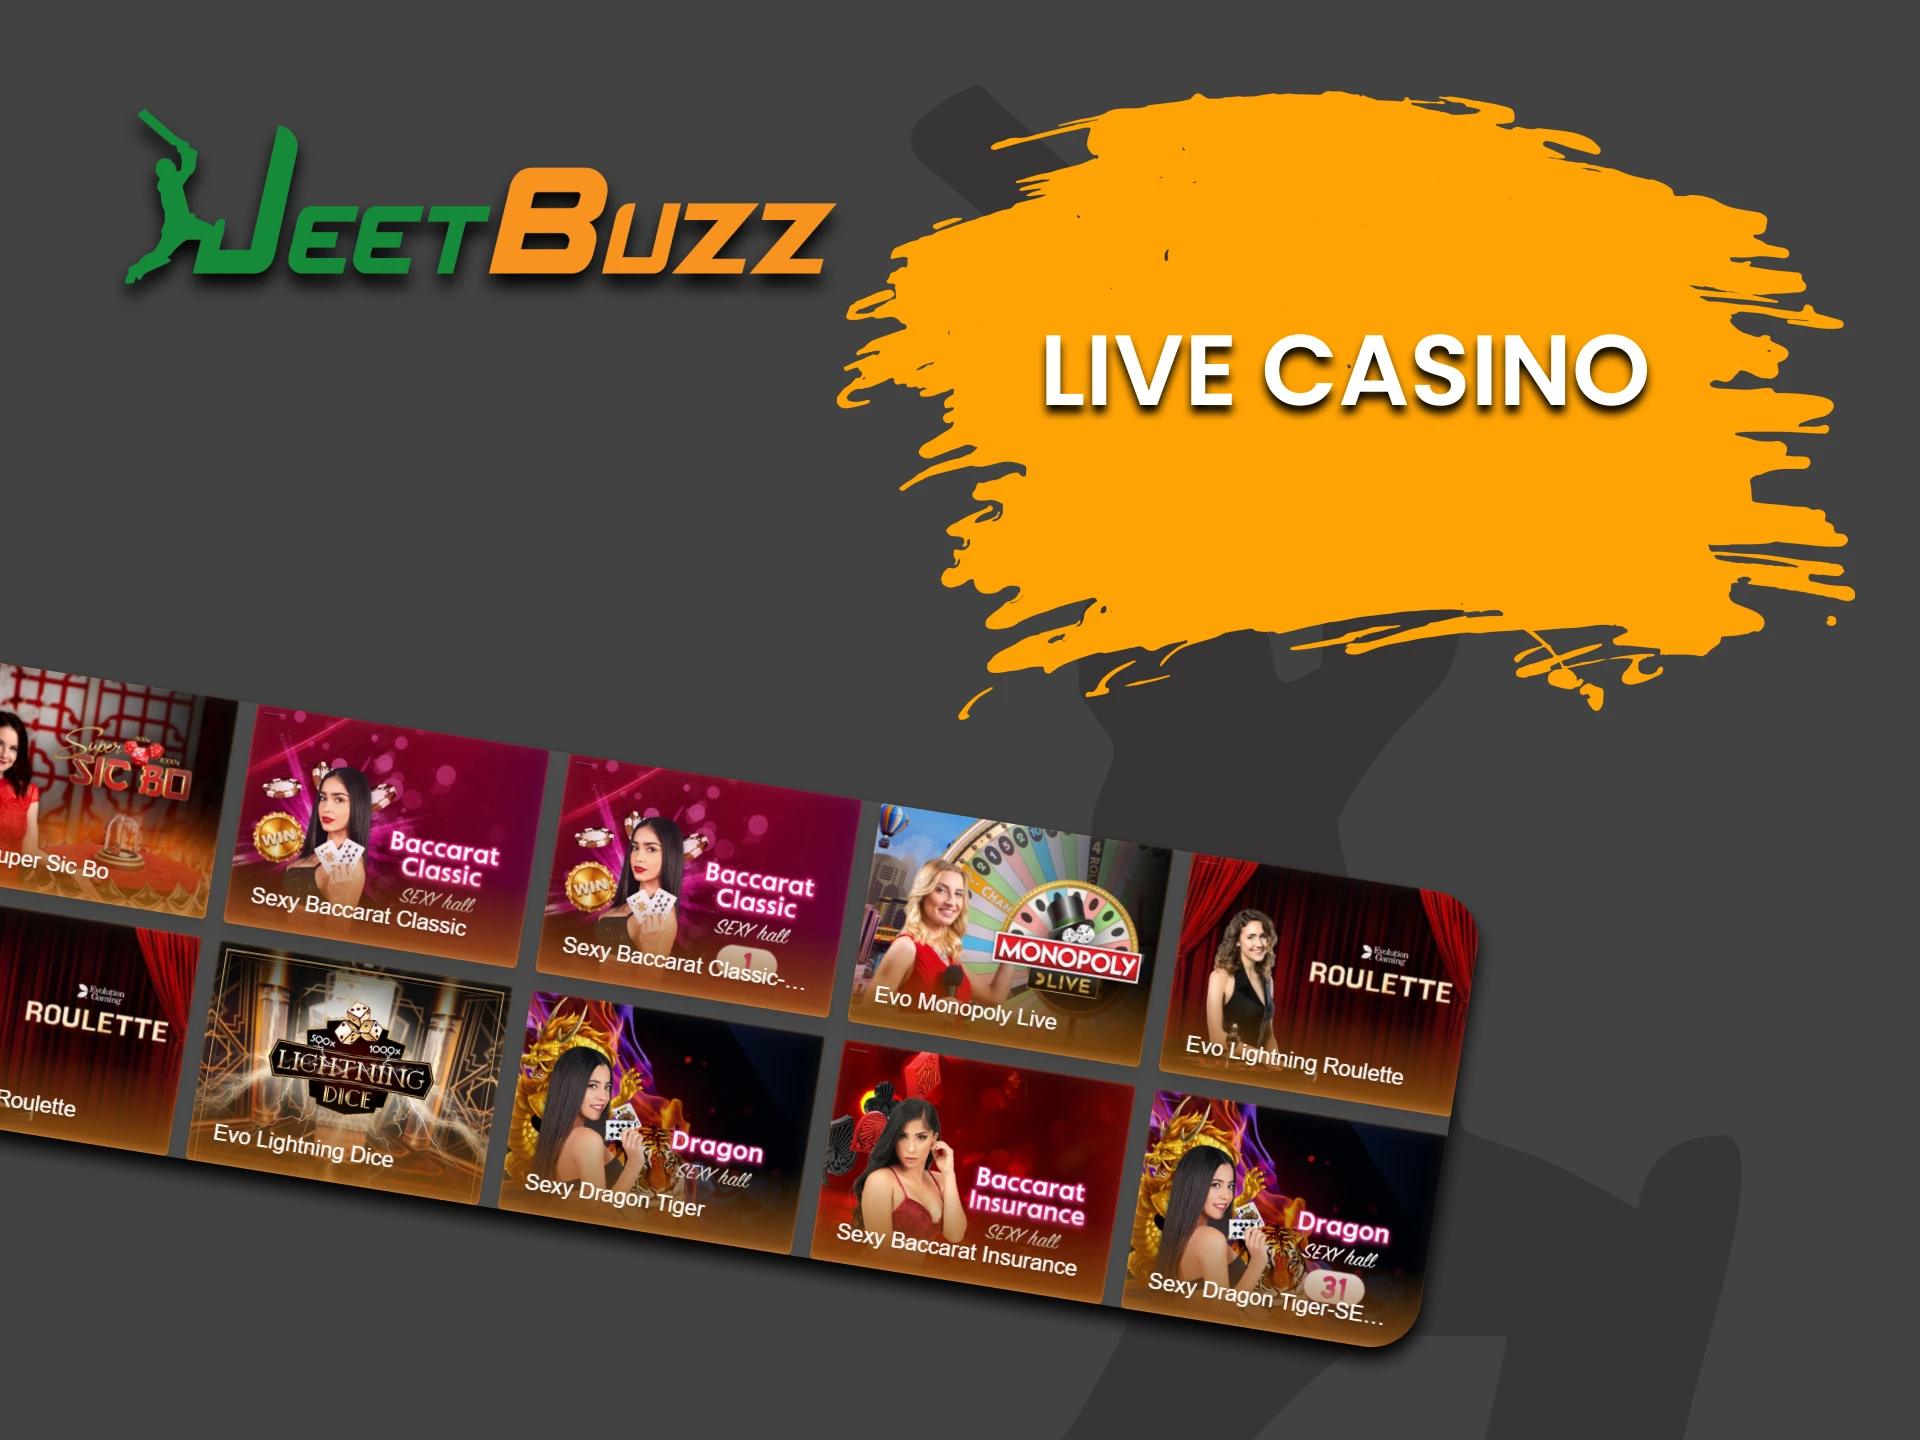 Go to the Live Casino section for casino games on JeetBuzz.